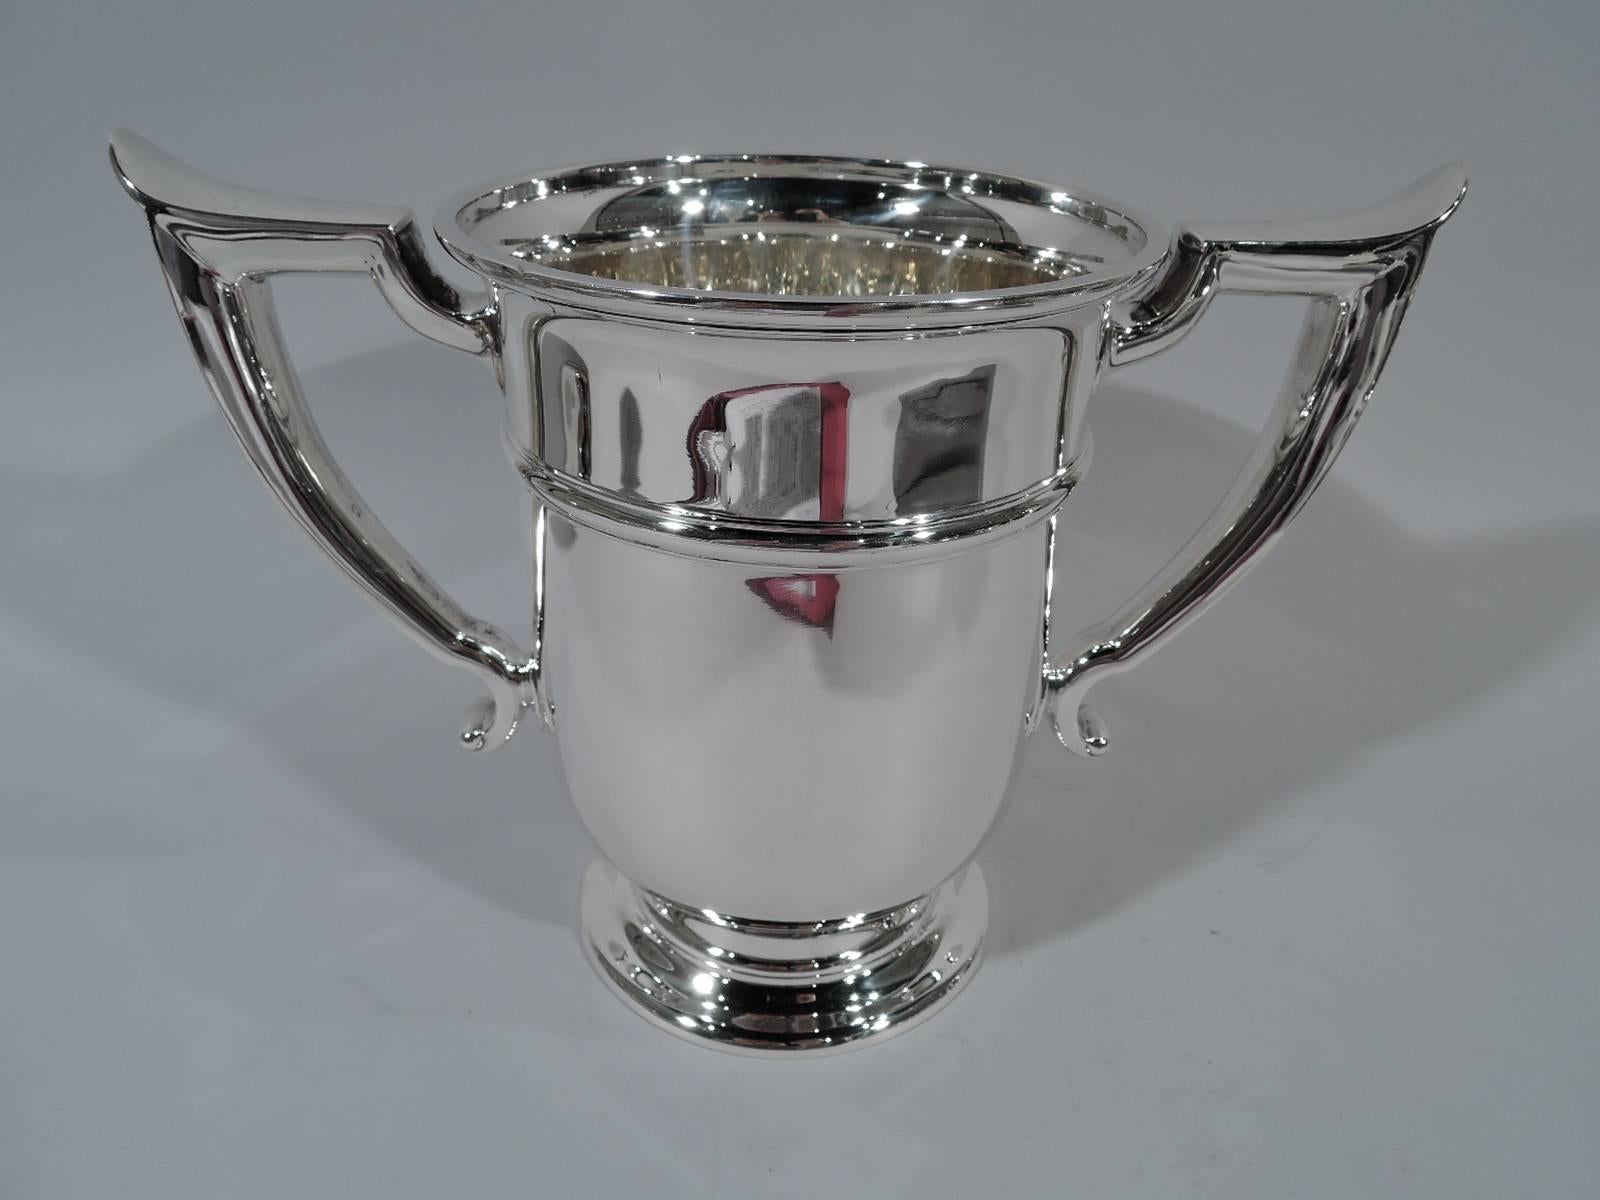 Classic sterling silver trophy cup. Made by Gorham in Providence in 1929. Straight sides with capped scroll bracket side handles and stepped round foot. Spare and elegant with one raised band. Hallmark includes no. A13712 and date symbol. Weight: 33